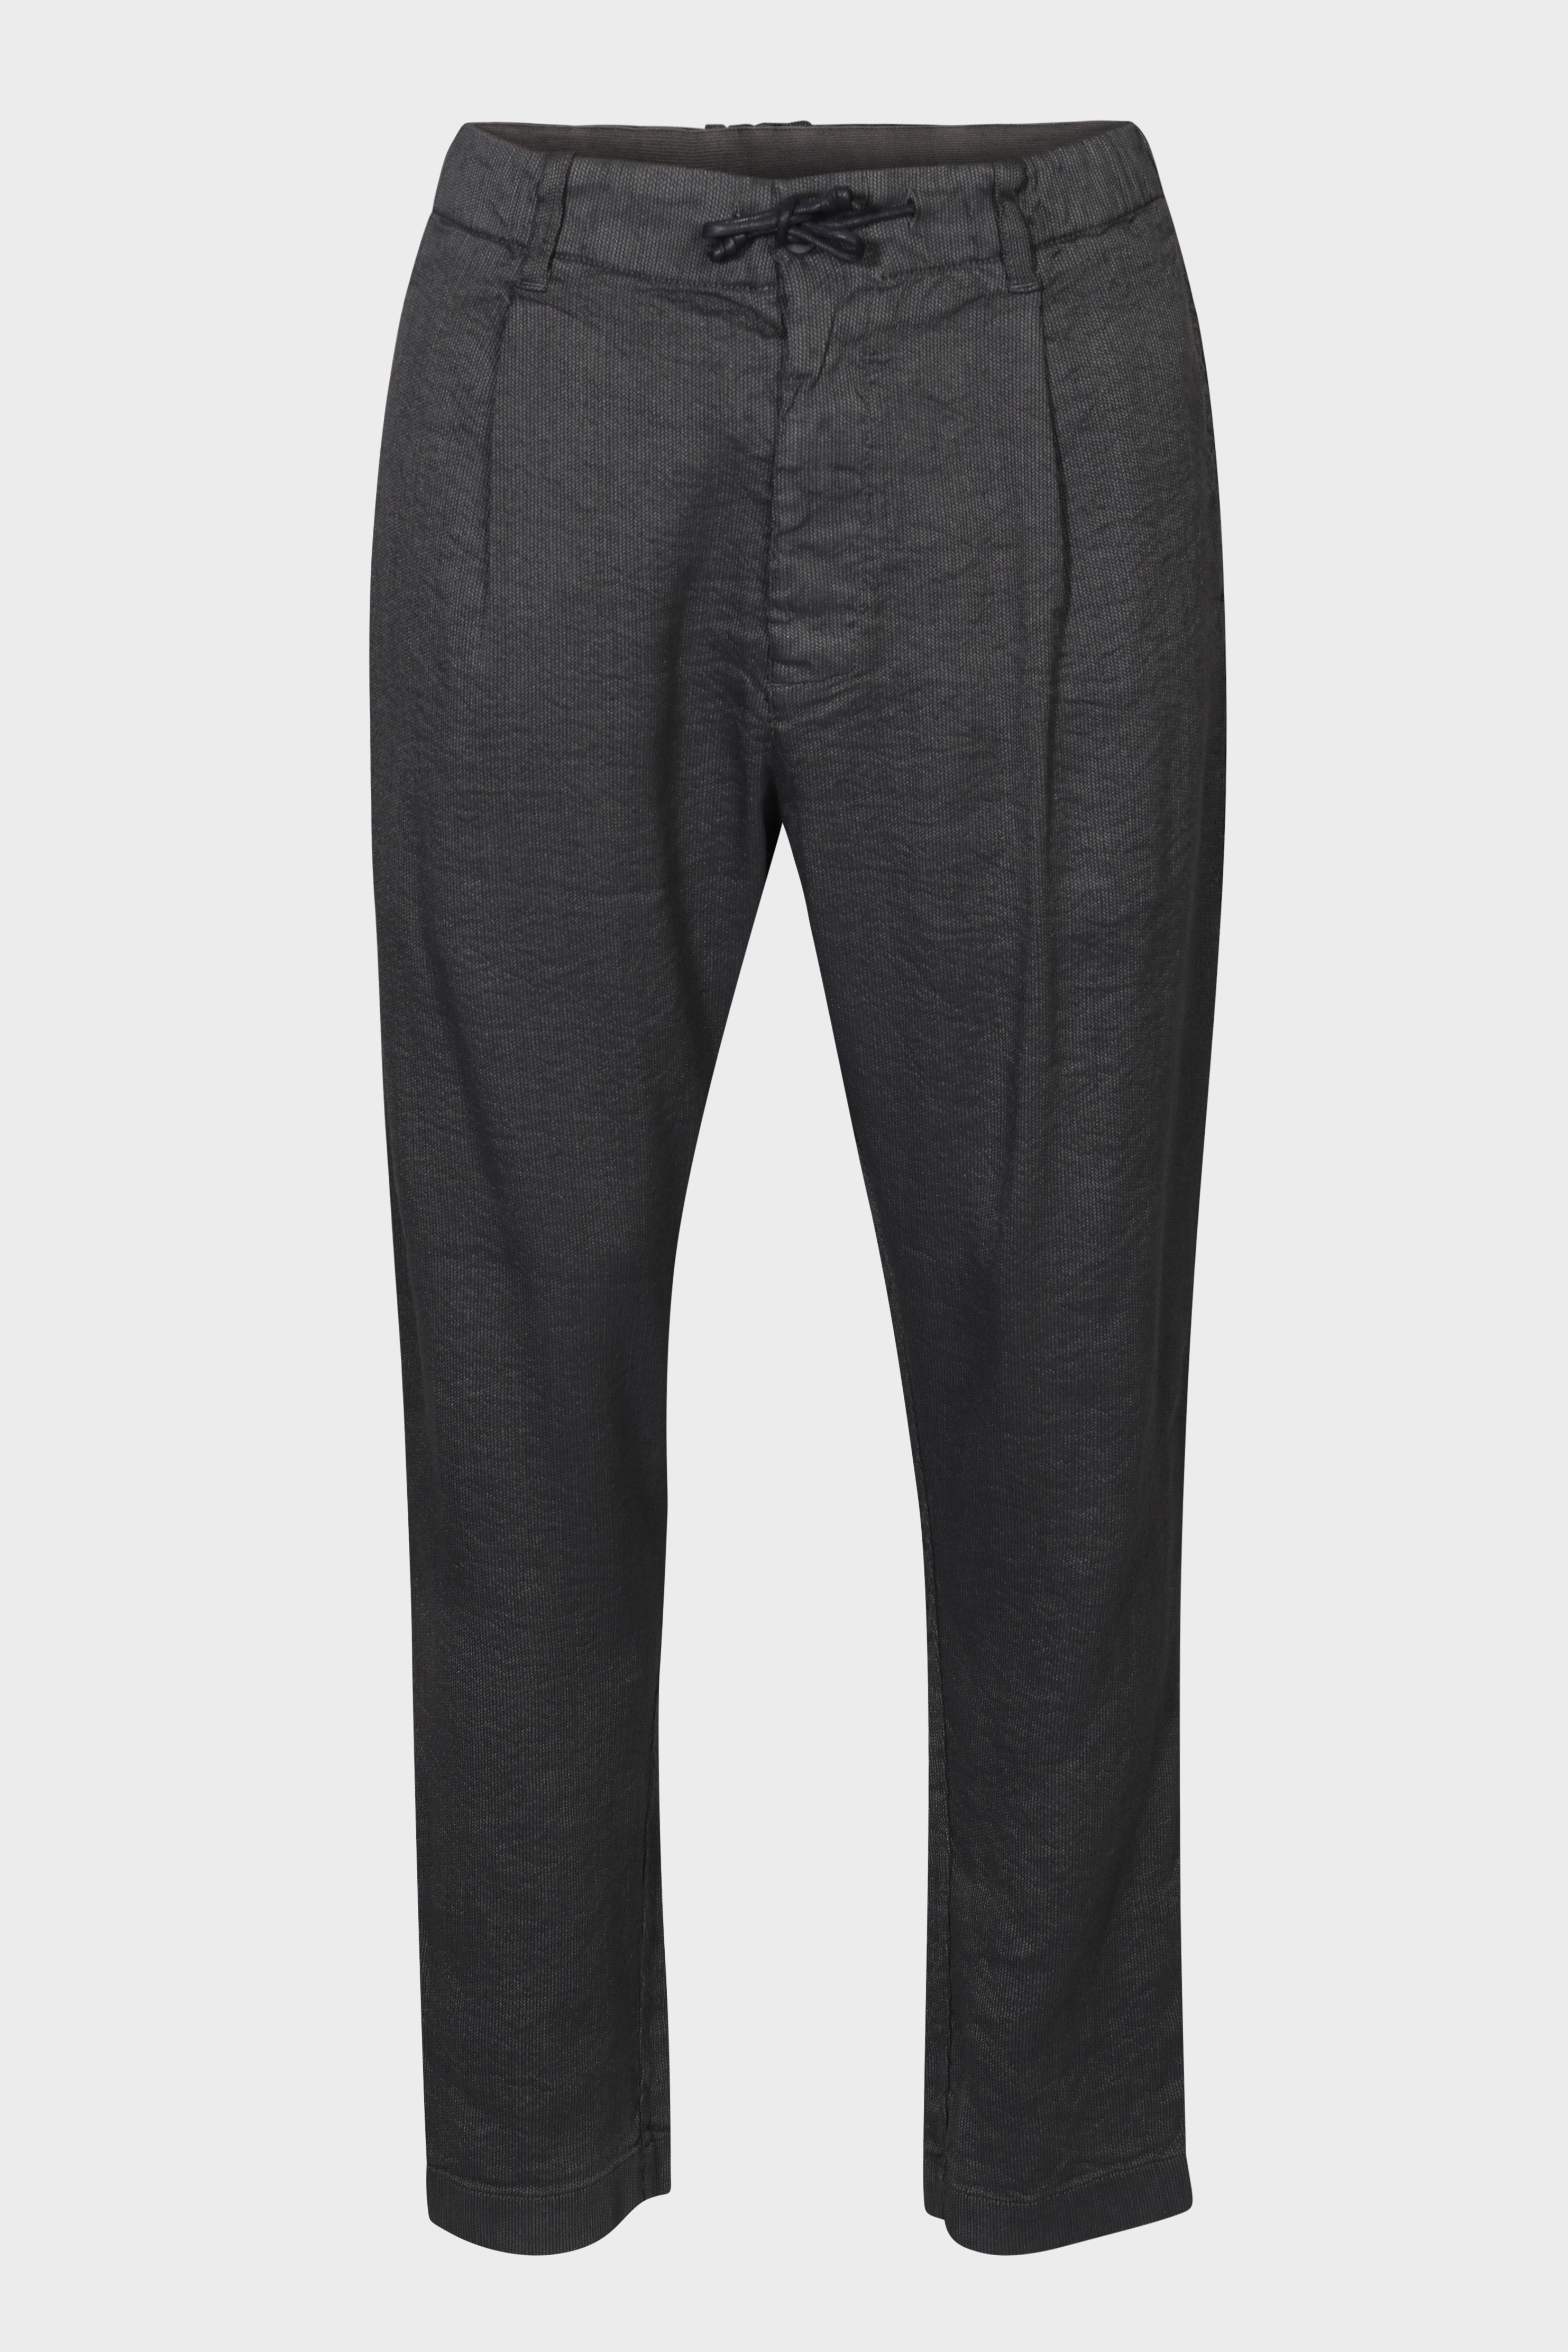 TRANSIT UOMO Structure Stretch Pant in Charcoal